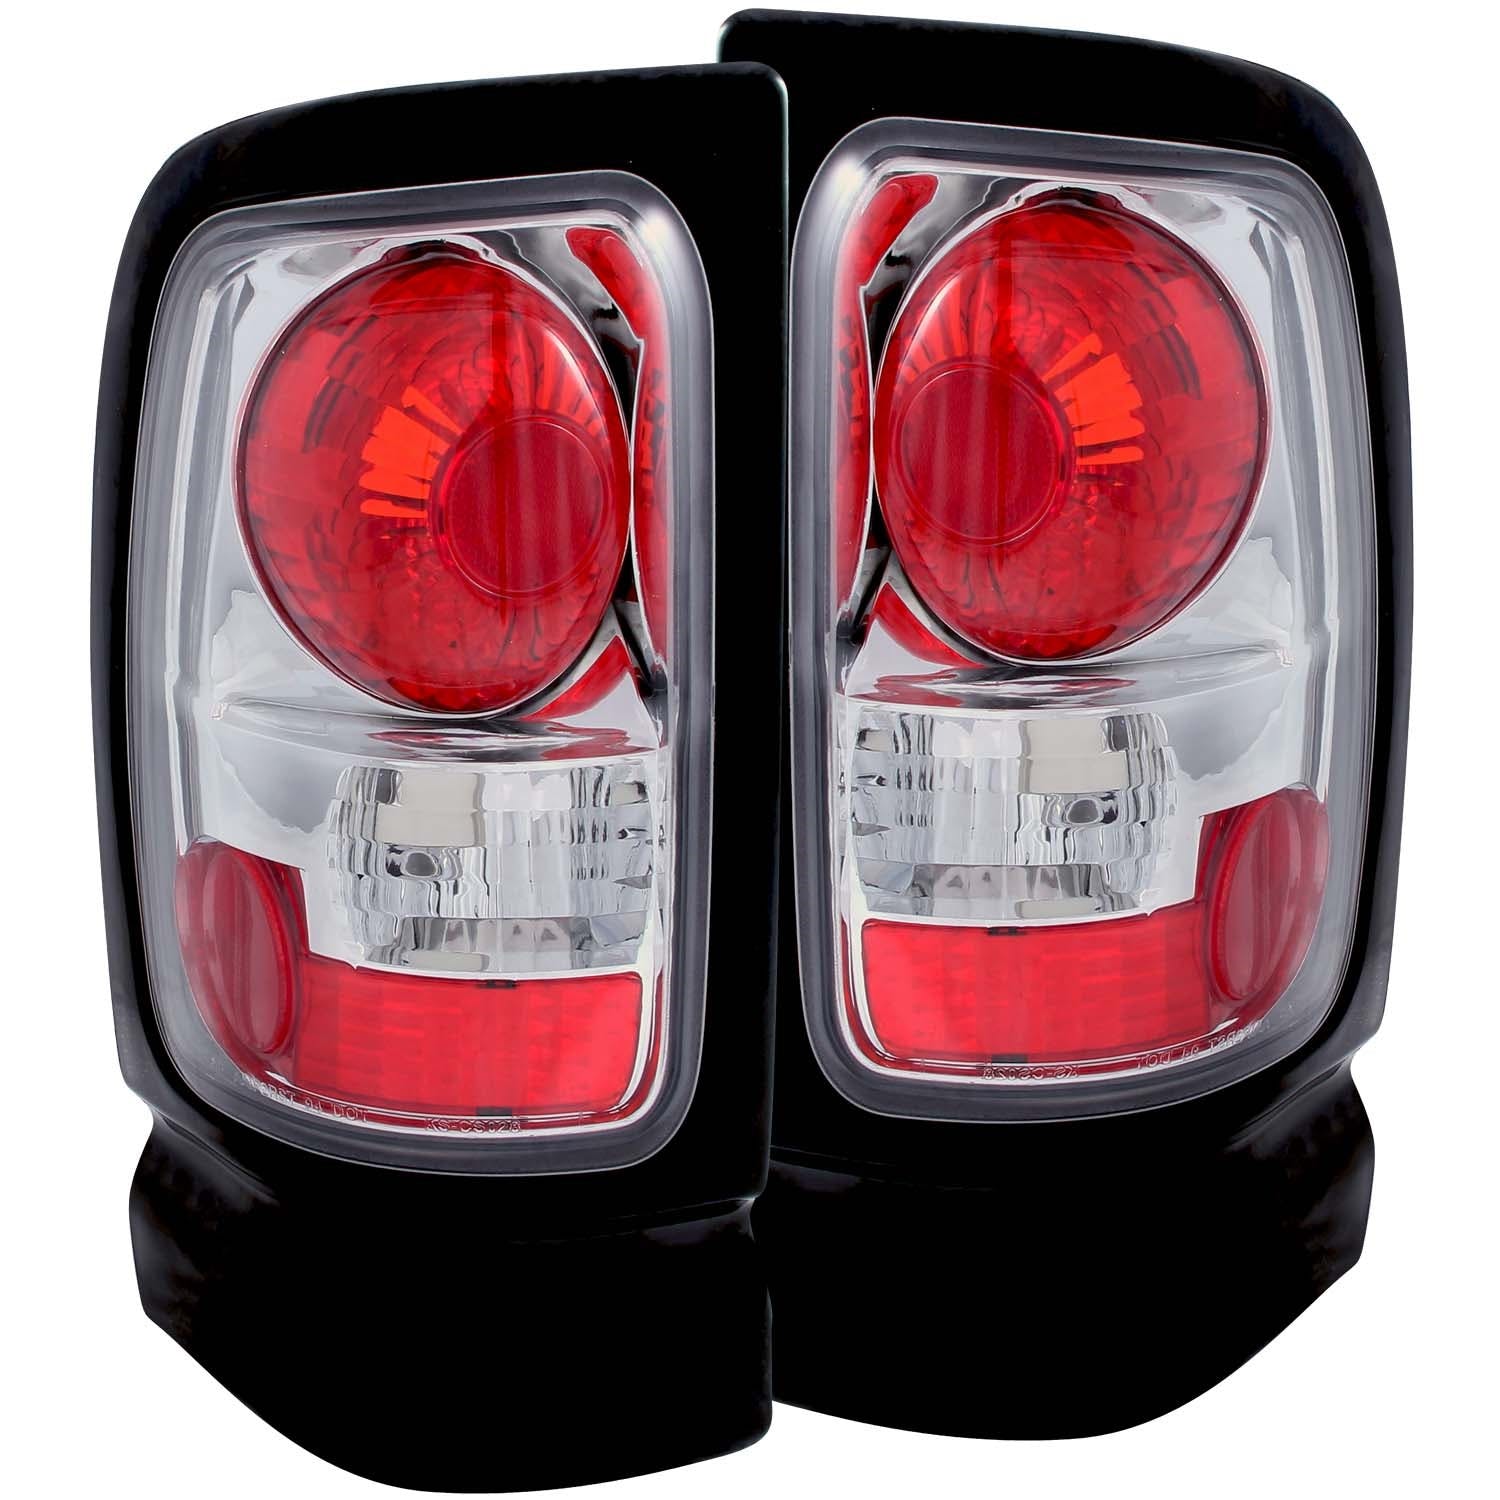 AnzoUSA 211046 Taillights Chrome